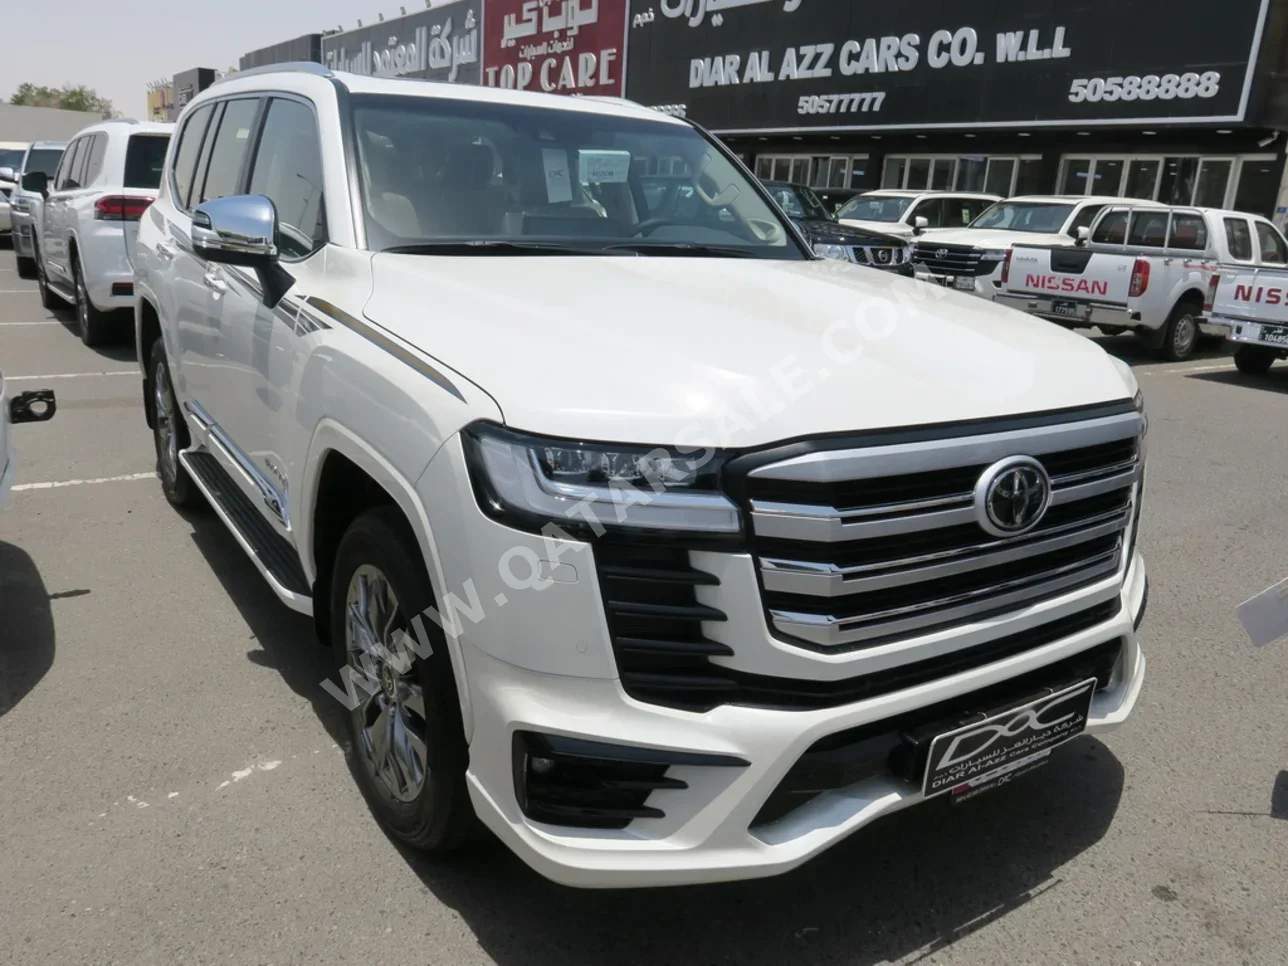 Toyota  Land Cruiser  VXR Twin Turbo  2024  Automatic  0 Km  6 Cylinder  Four Wheel Drive (4WD)  SUV  White  With Warranty